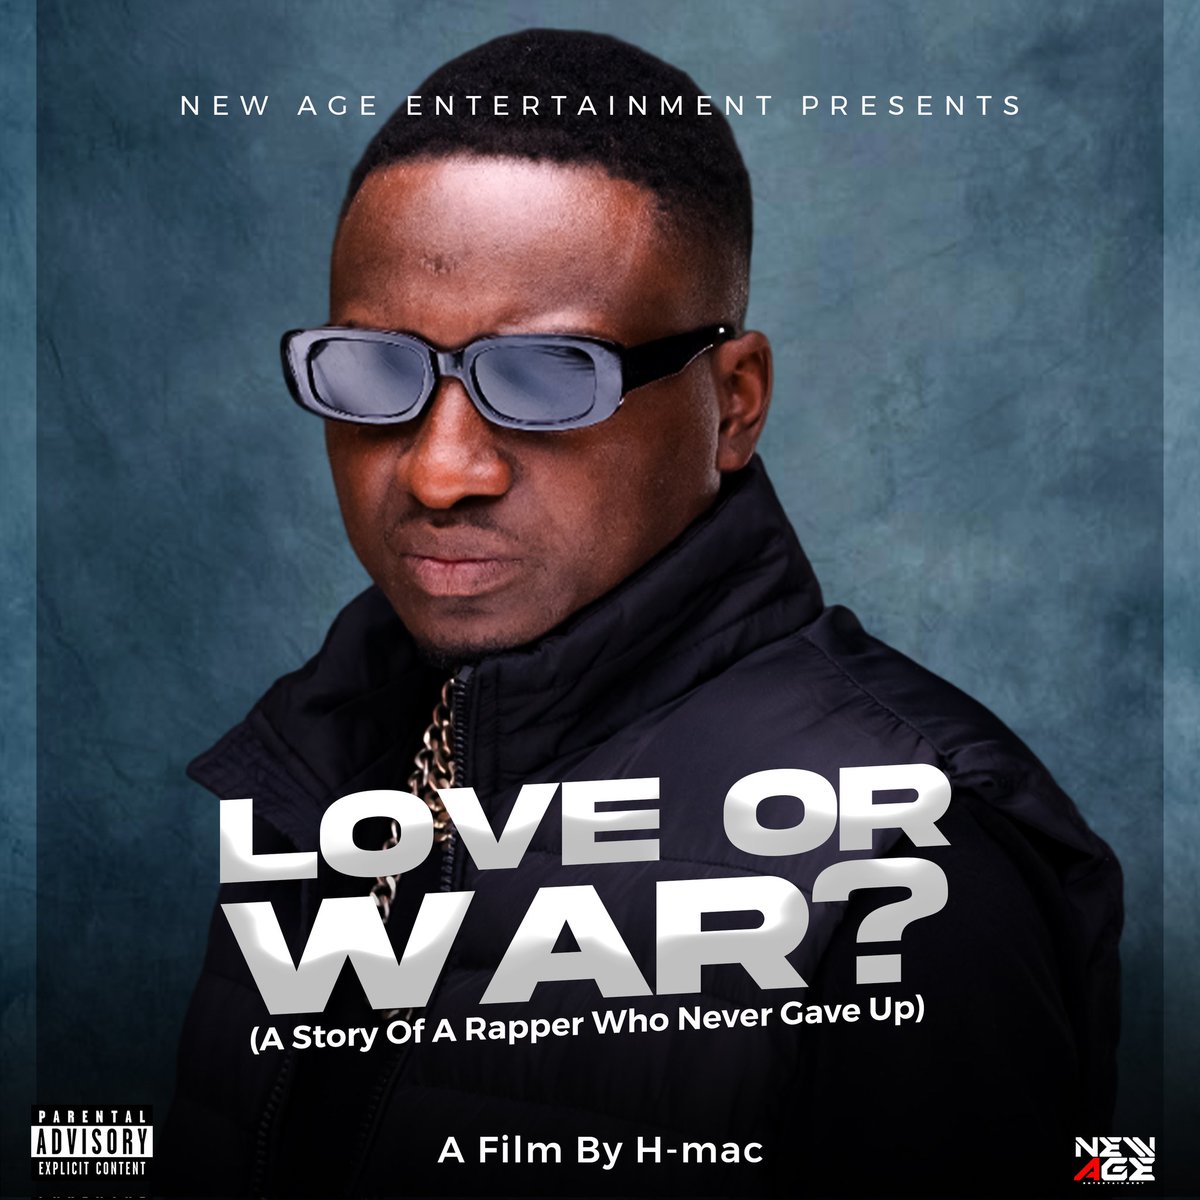 If you love Hip Hop, today is your day. Here is the Official Album Artwork for Camstar Love Or War? (A Story Of A Rapper Who Never Gave Up)